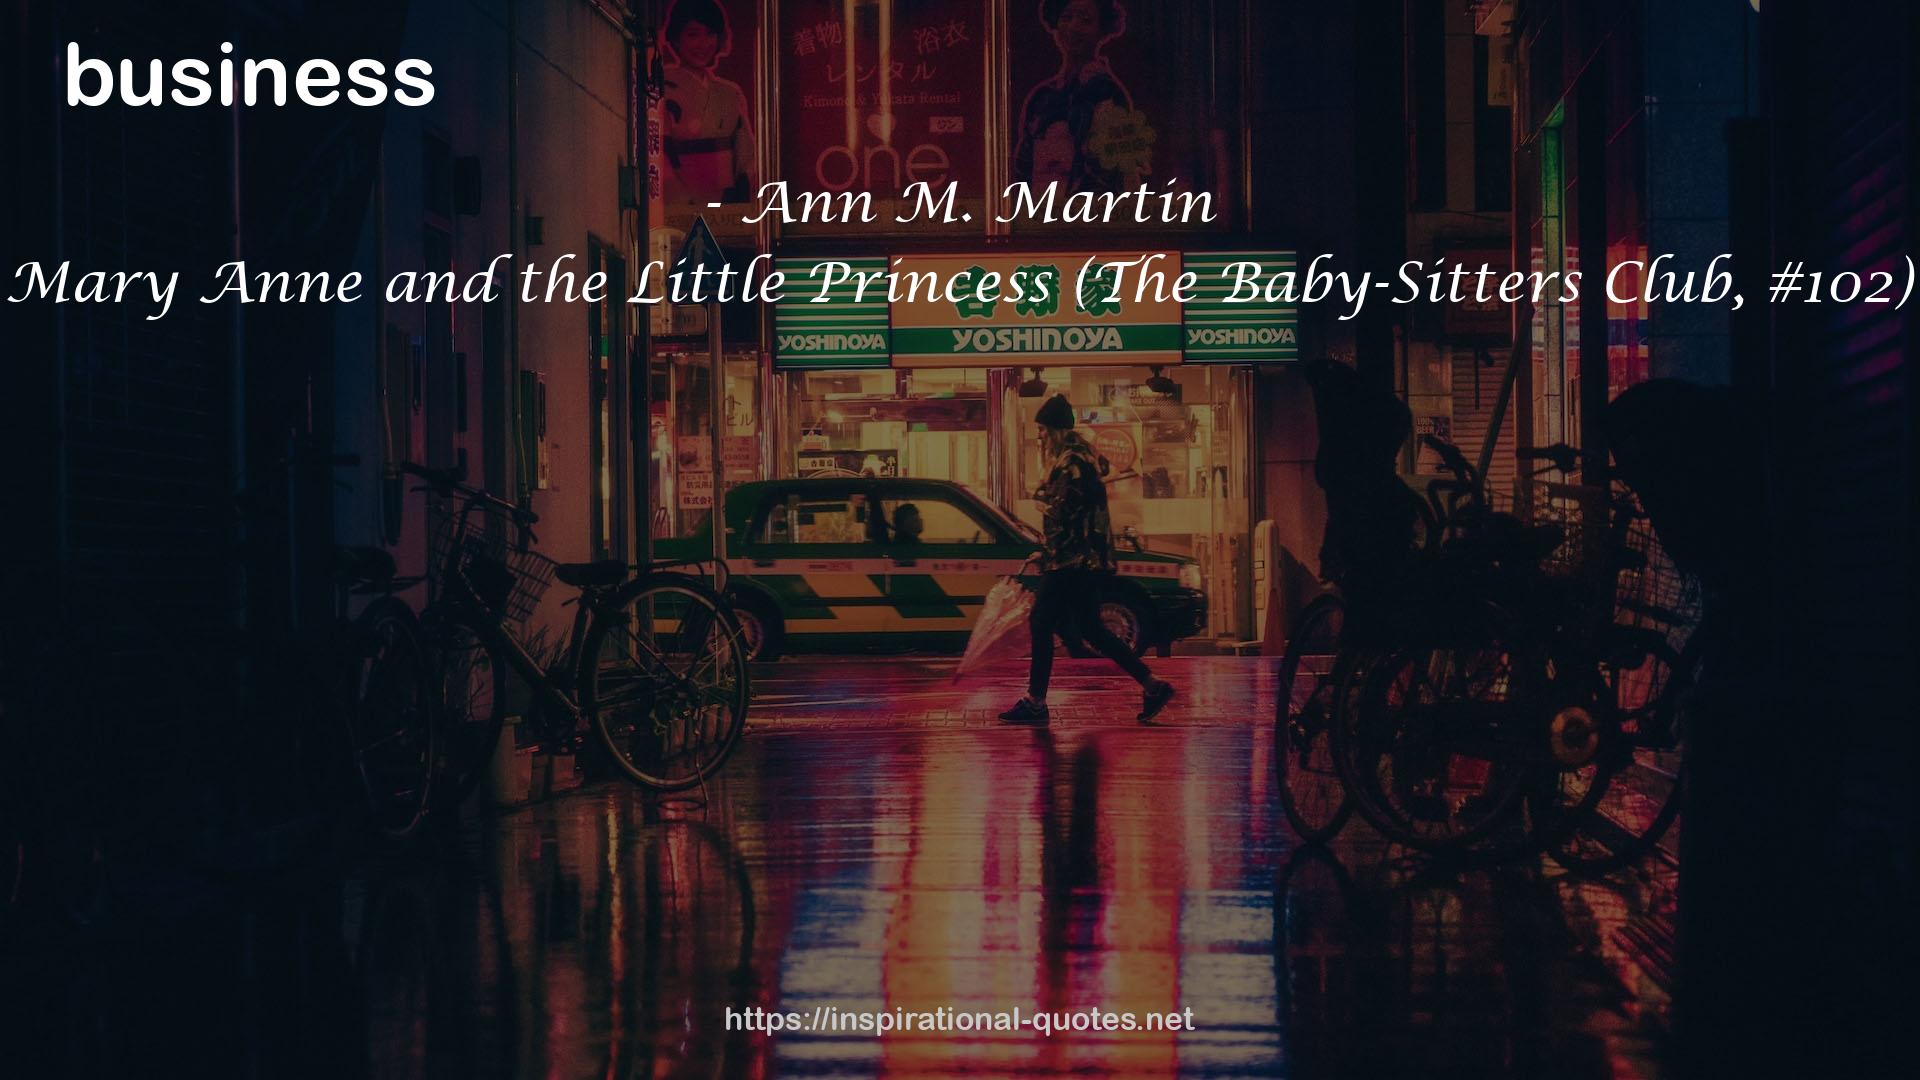 Mary Anne and the Little Princess (The Baby-Sitters Club, #102) QUOTES